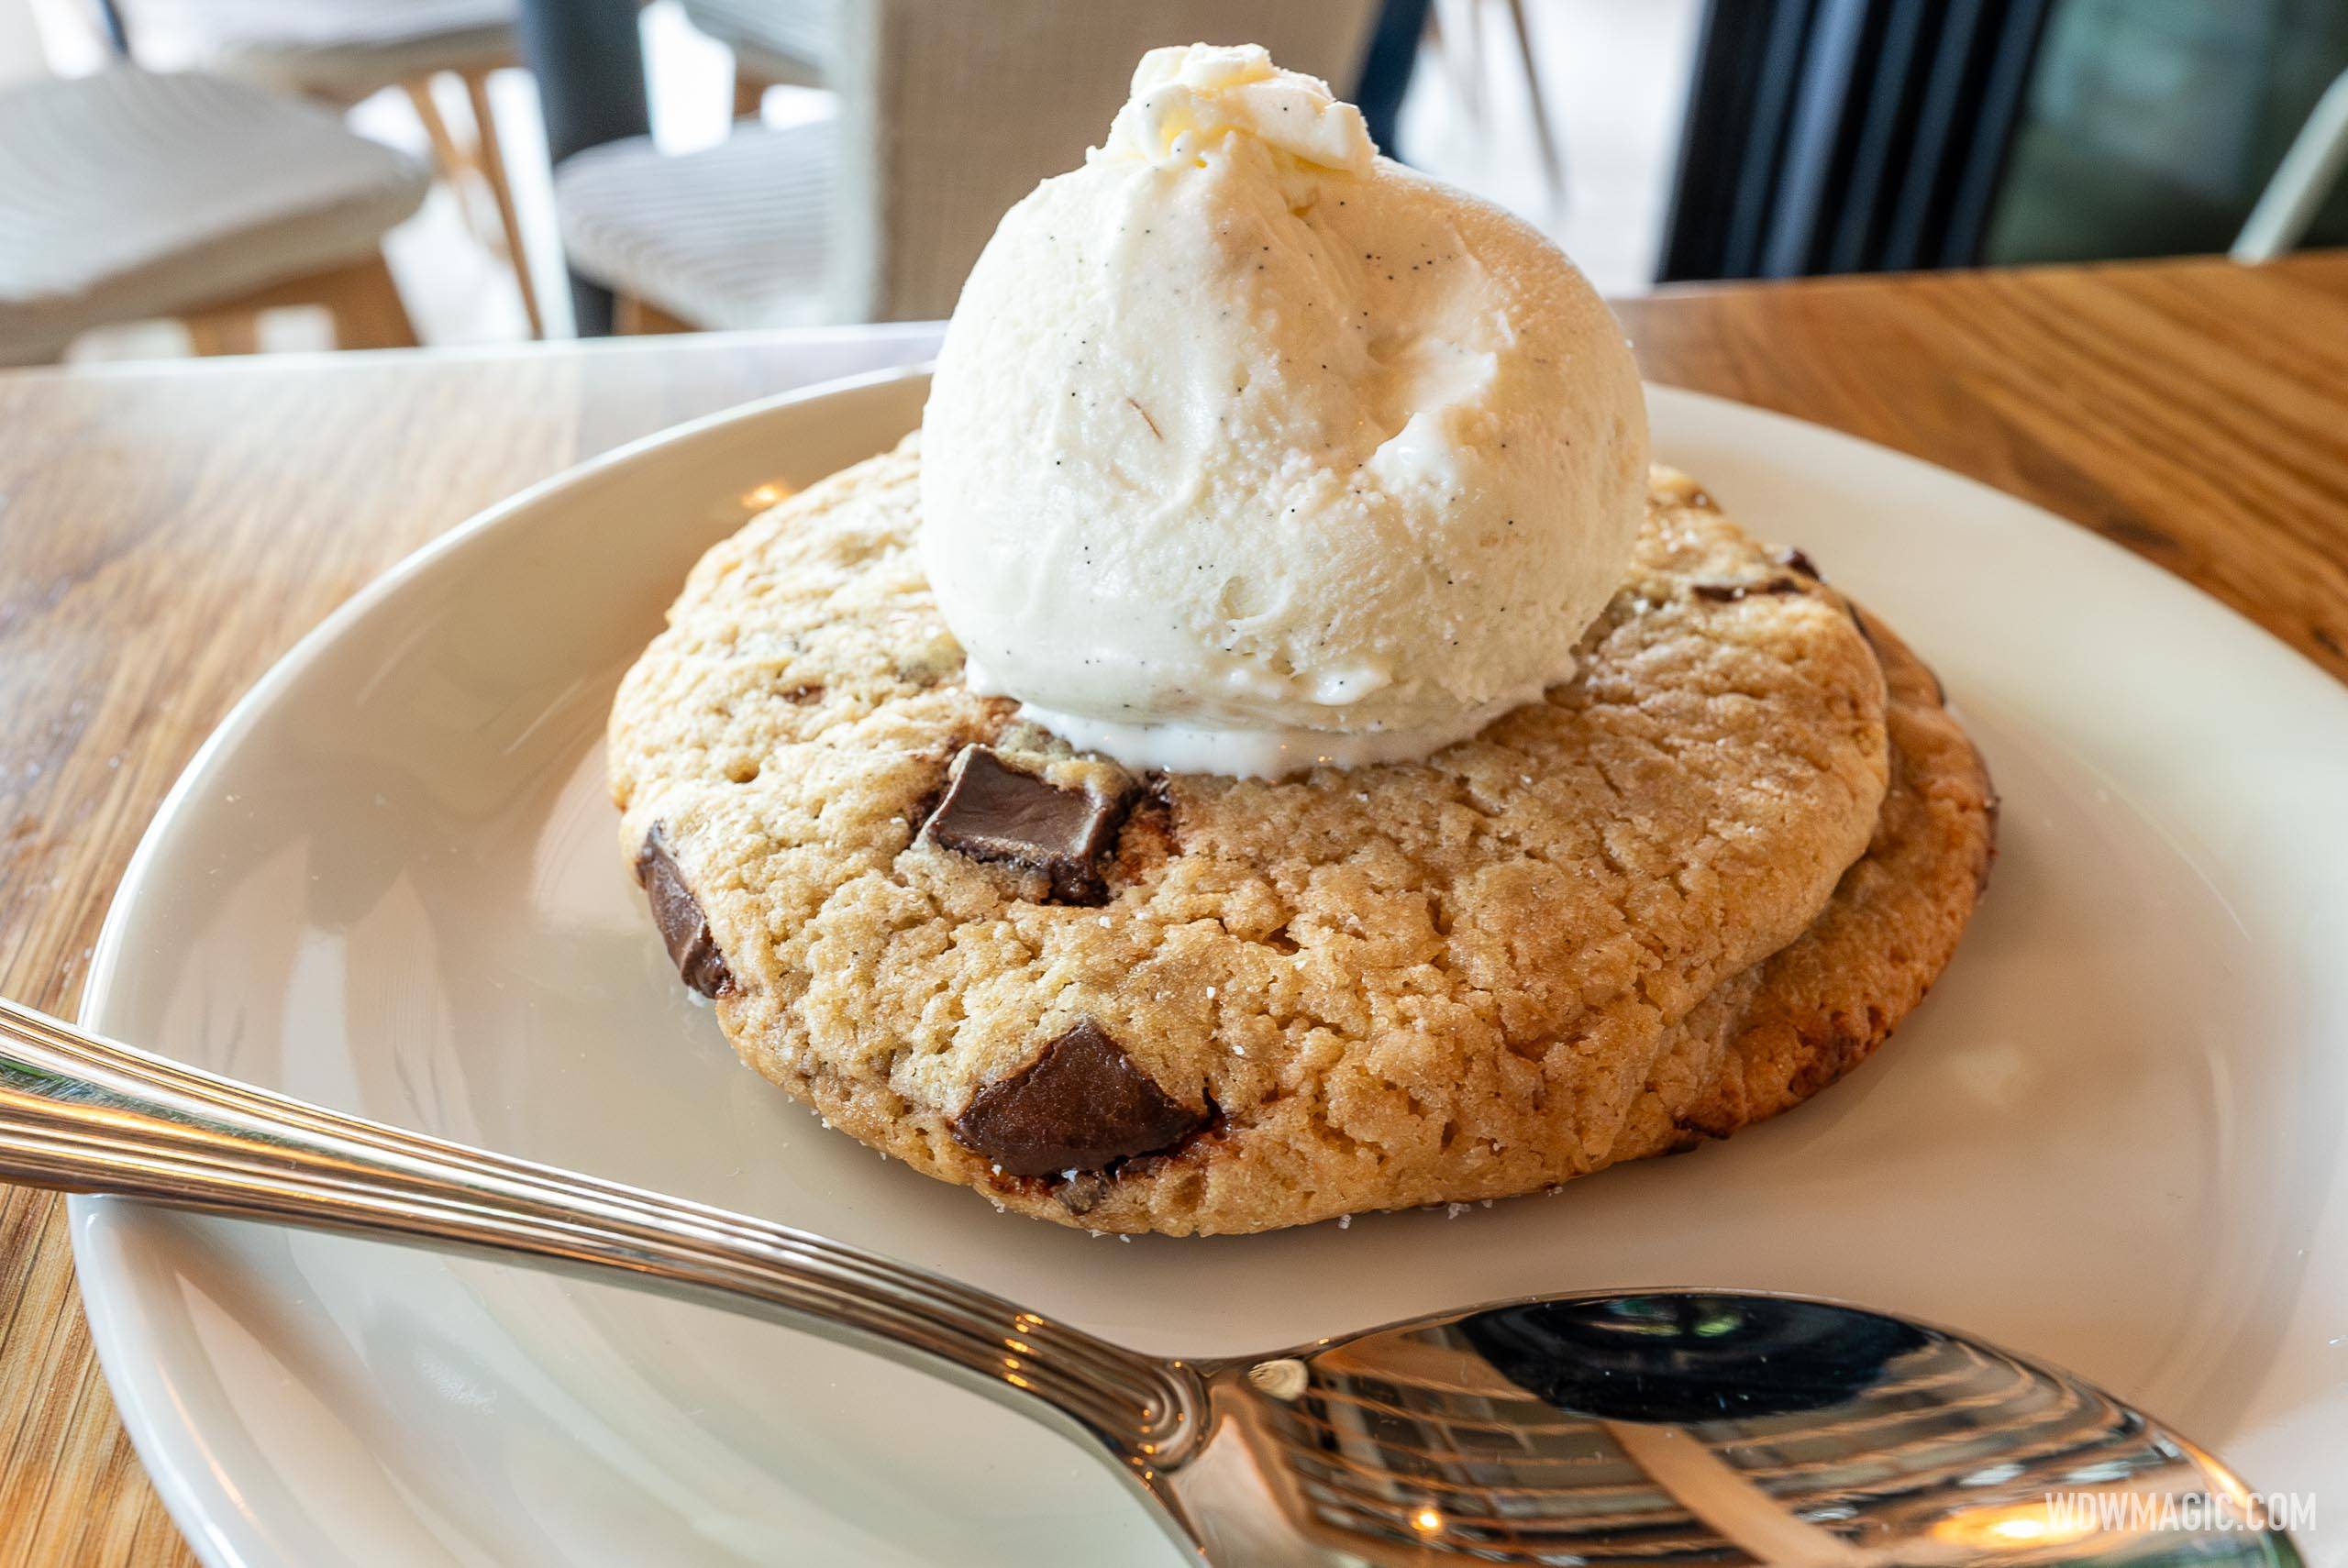 Warm Chocolate Chip Cookie with Ice Cream